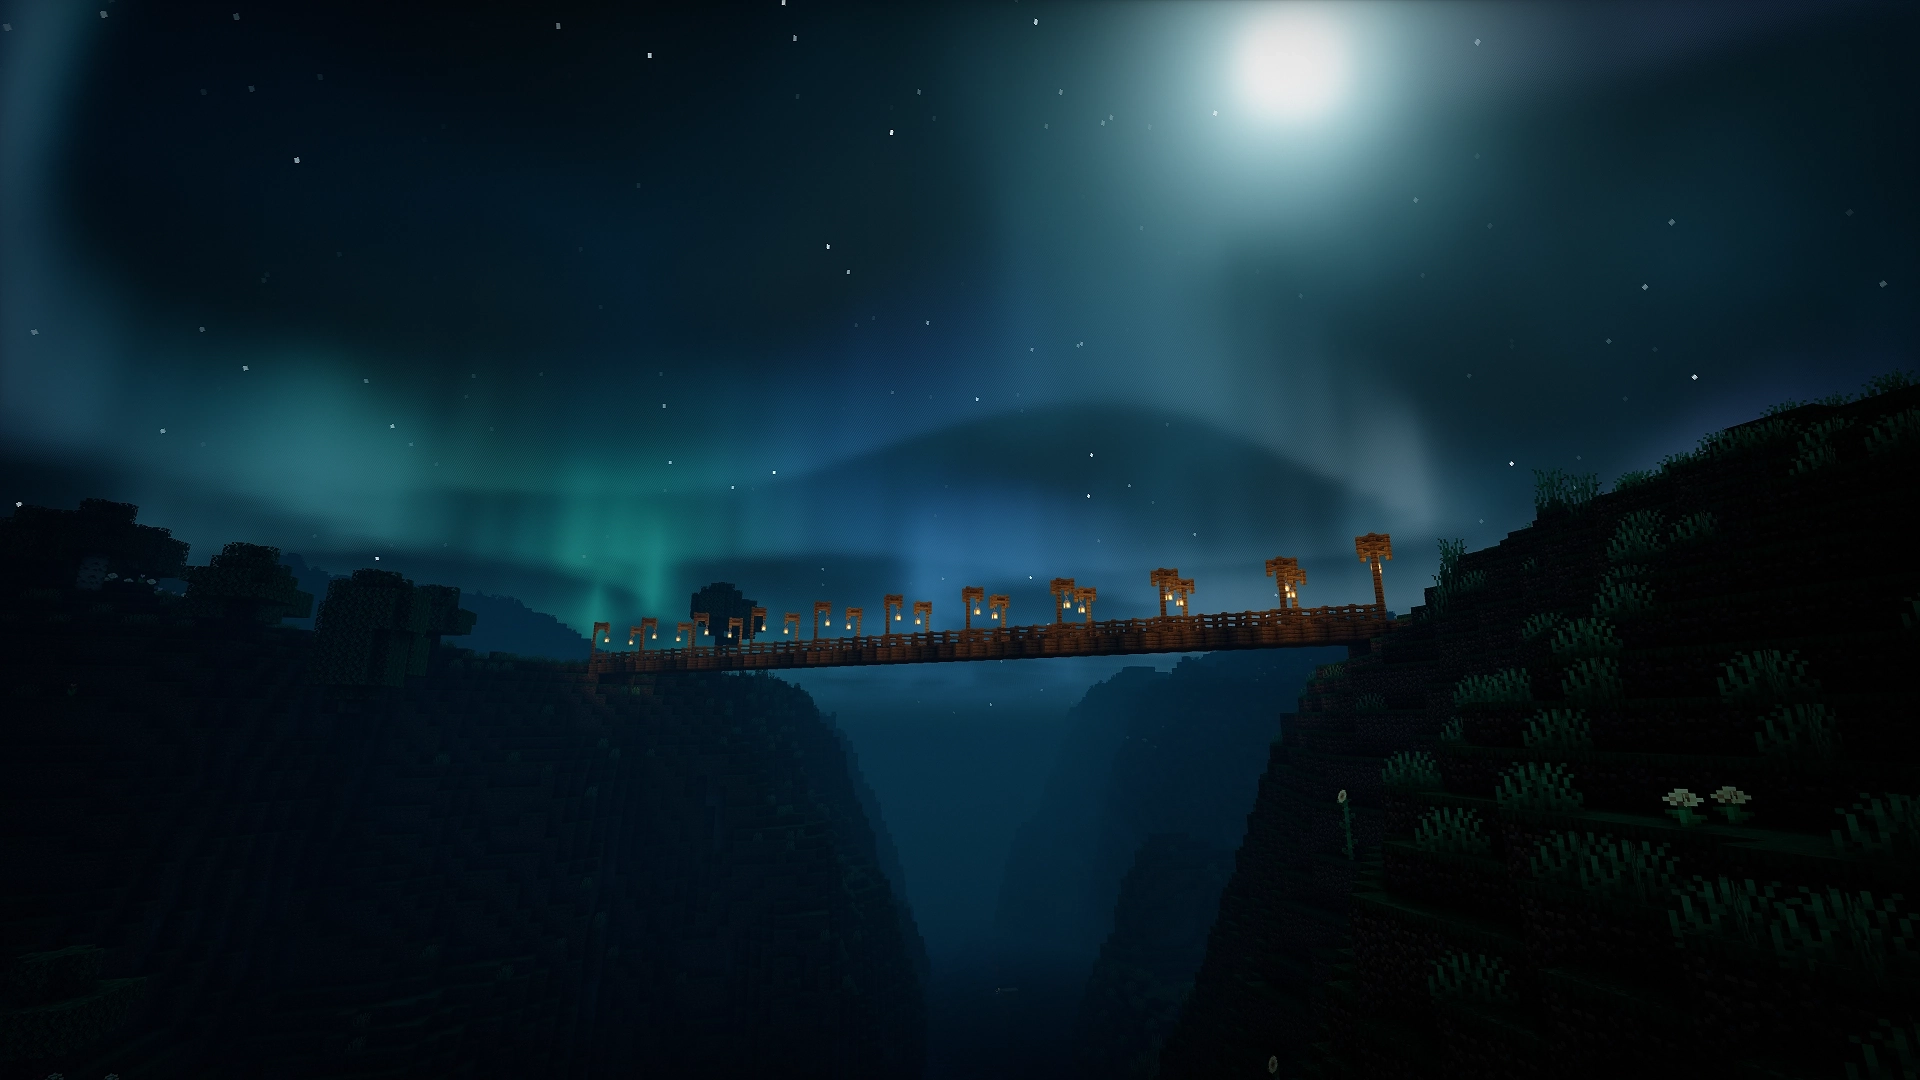 A cinematic shot of a tiny wooden bridge spanning two cliff sides on either side of the frame. The bridge has evenly spaced poles on either side of it with a shroomlight to illuminate the entire thing. The scene is set in the night time and the Aurora Borealis is visible in the background.